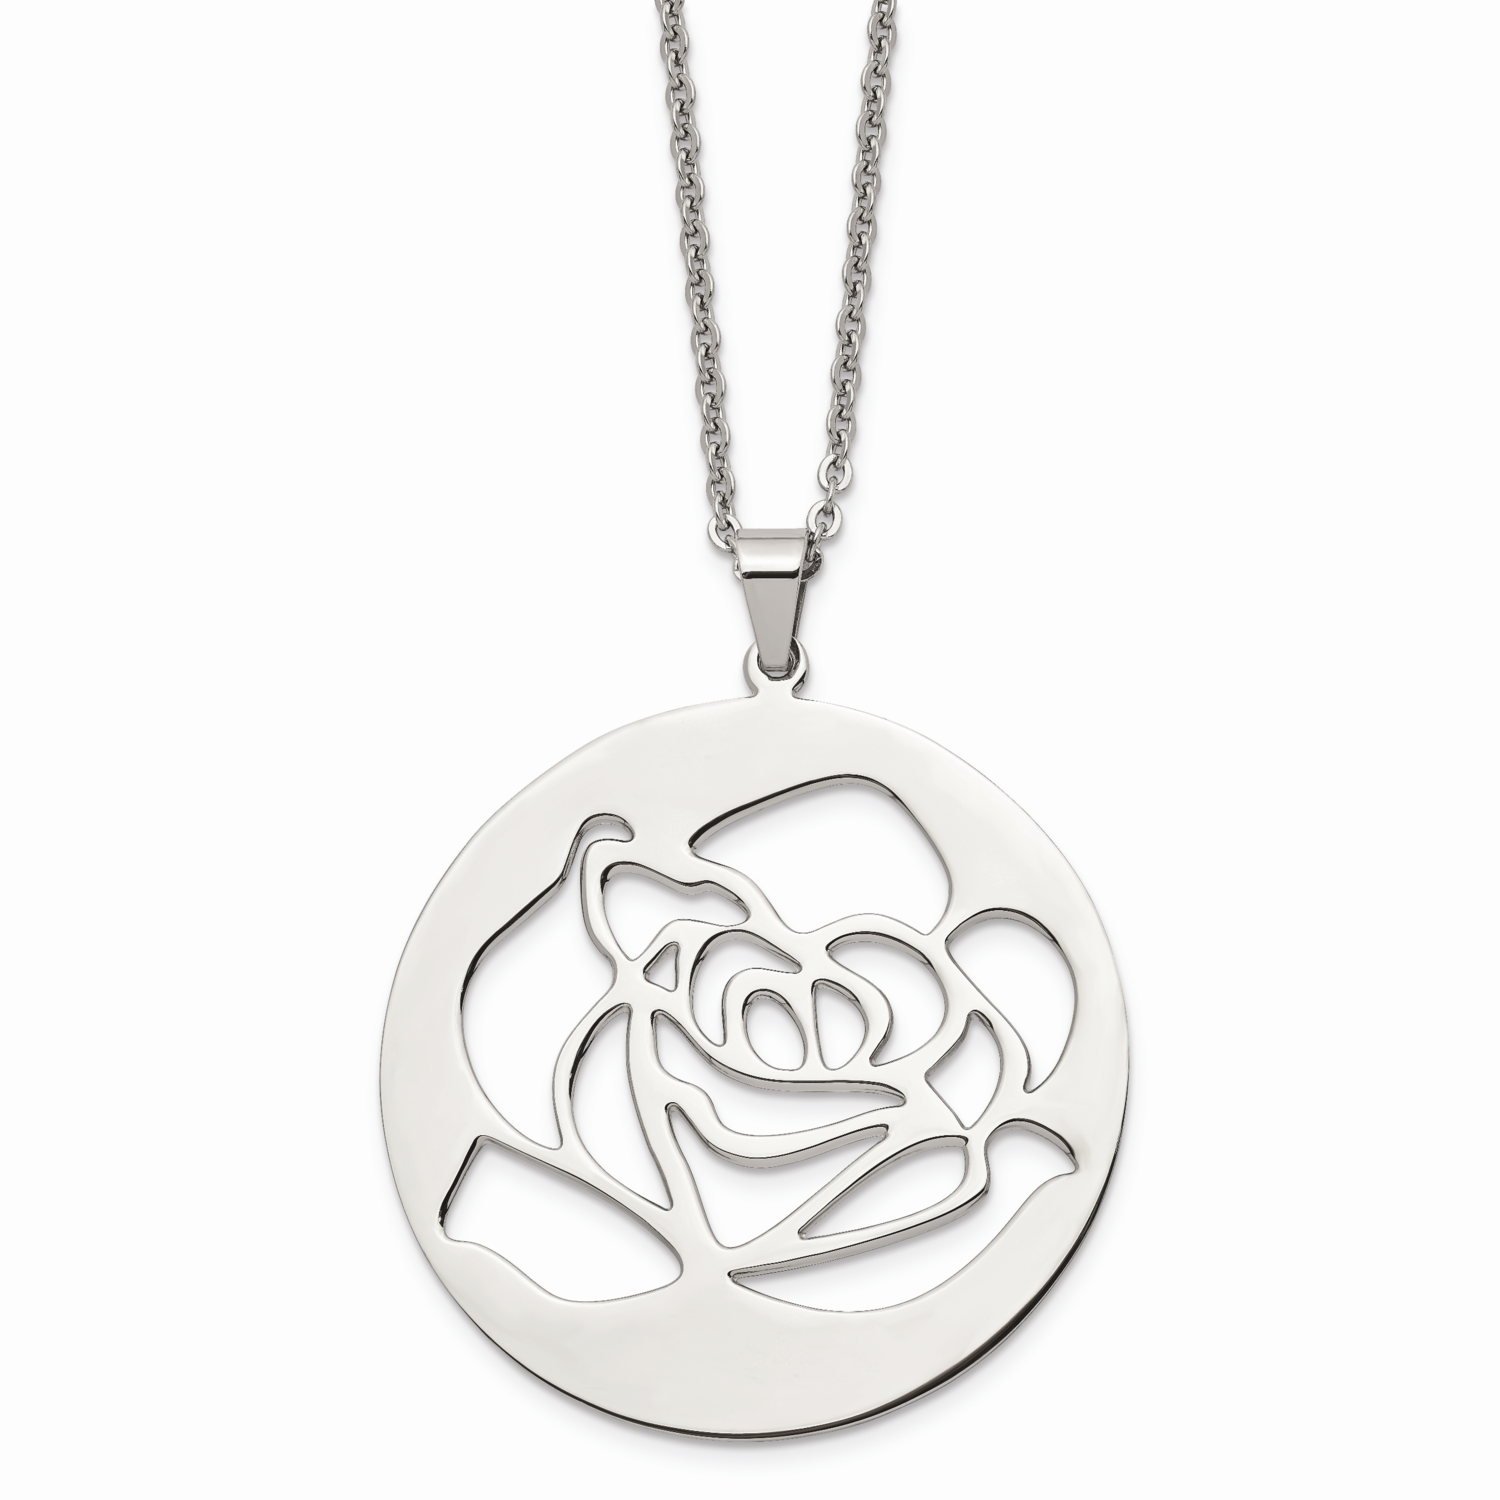 Rose Cutout Pendant Necklace Stainless Steel SRN640-22